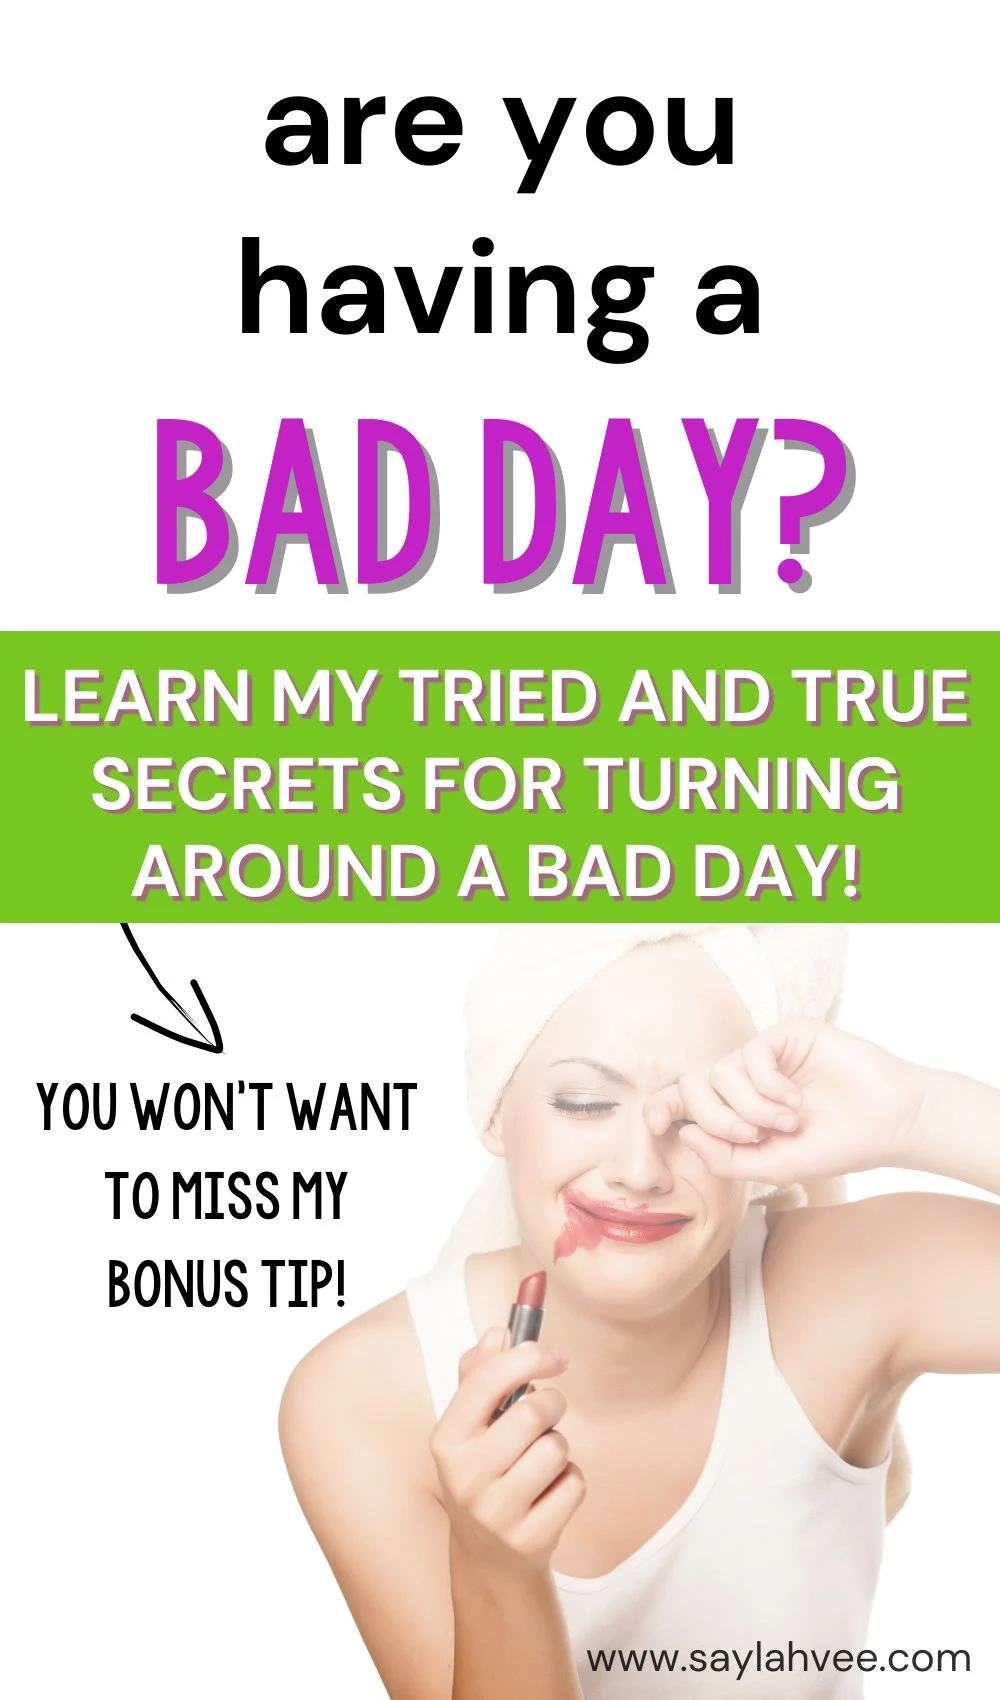 learn my tried and true secrets for turning around a bad day!